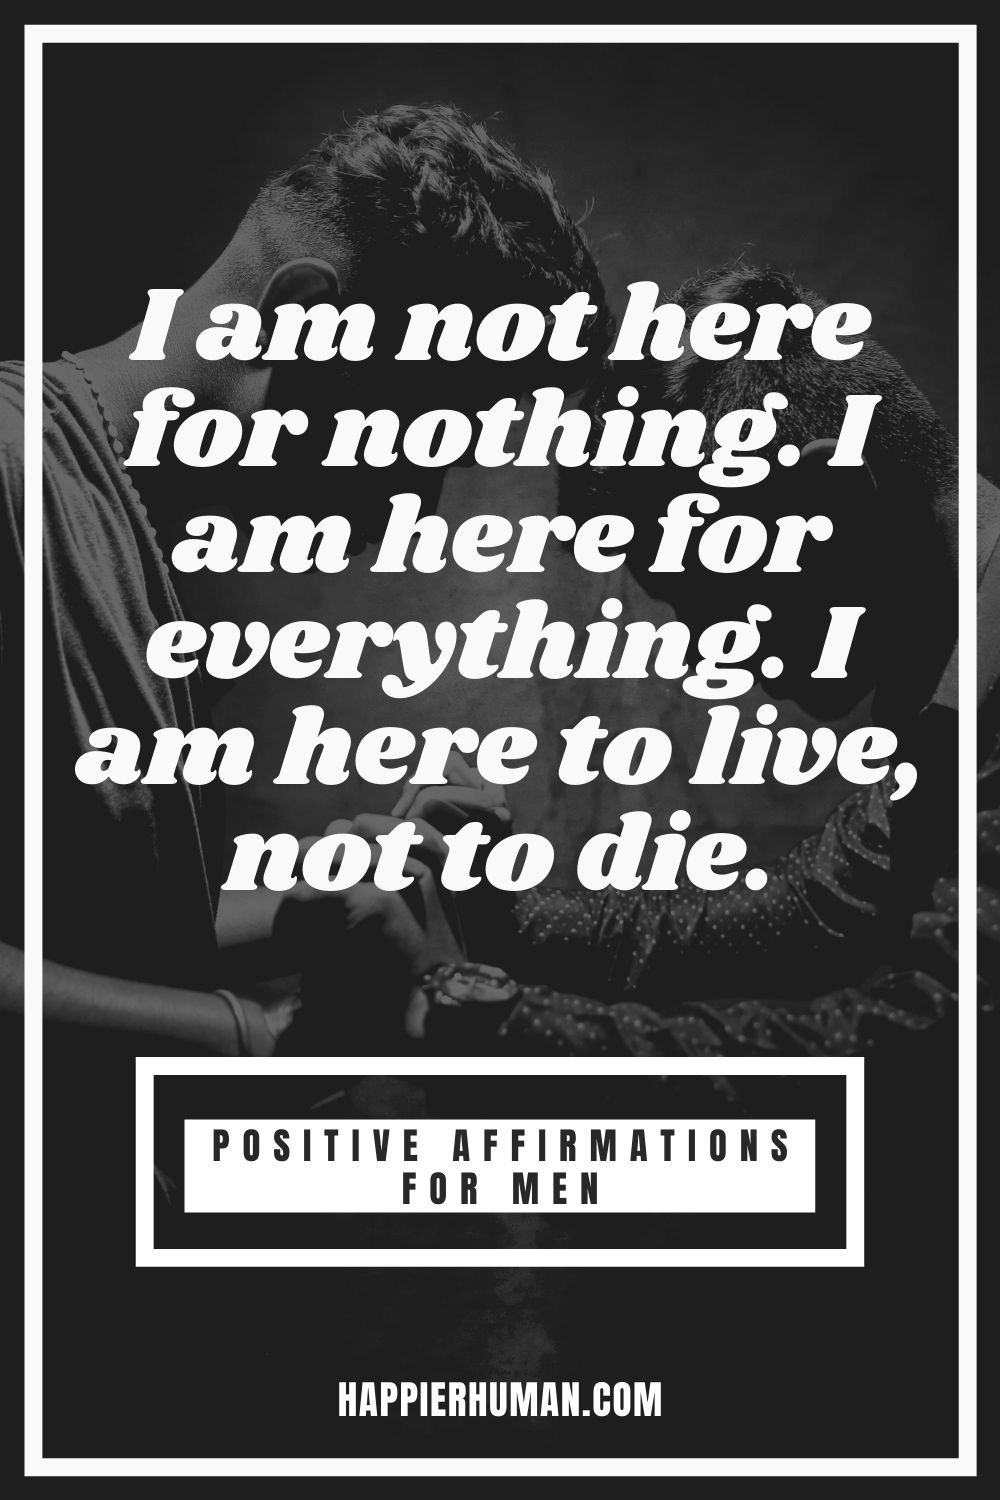 Affirmations for Men to Supercharge Your Life - I am not here for nothing. I am here for everything. I am here to live, not to die. | positive affirmations for men | positive affirmations for your man | positive affirmations for alpha males #affirmations #affirmationsoftheday #affirmationswork